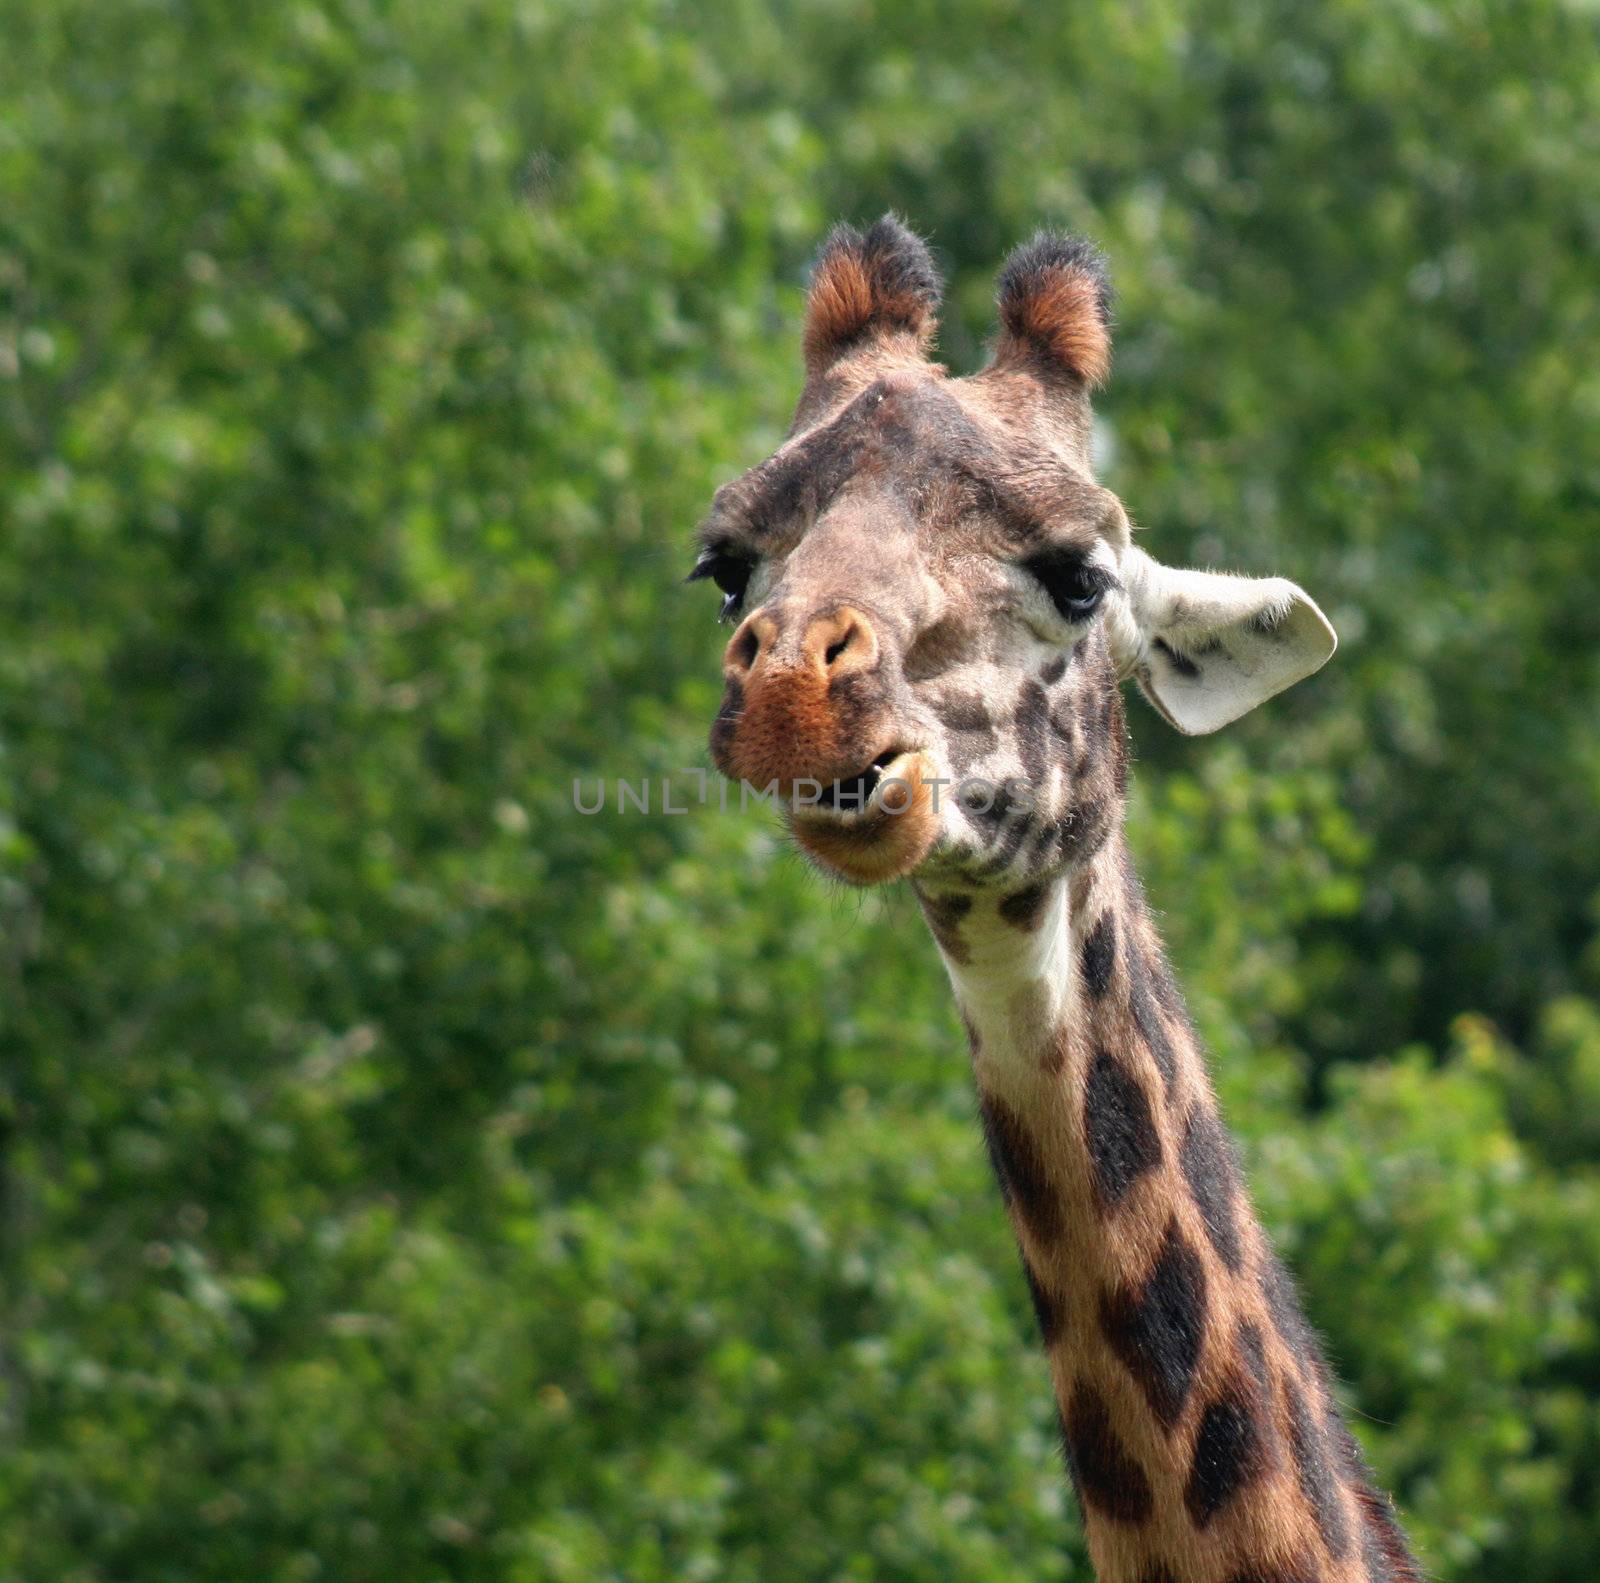 A giraffe chewing against a green background.